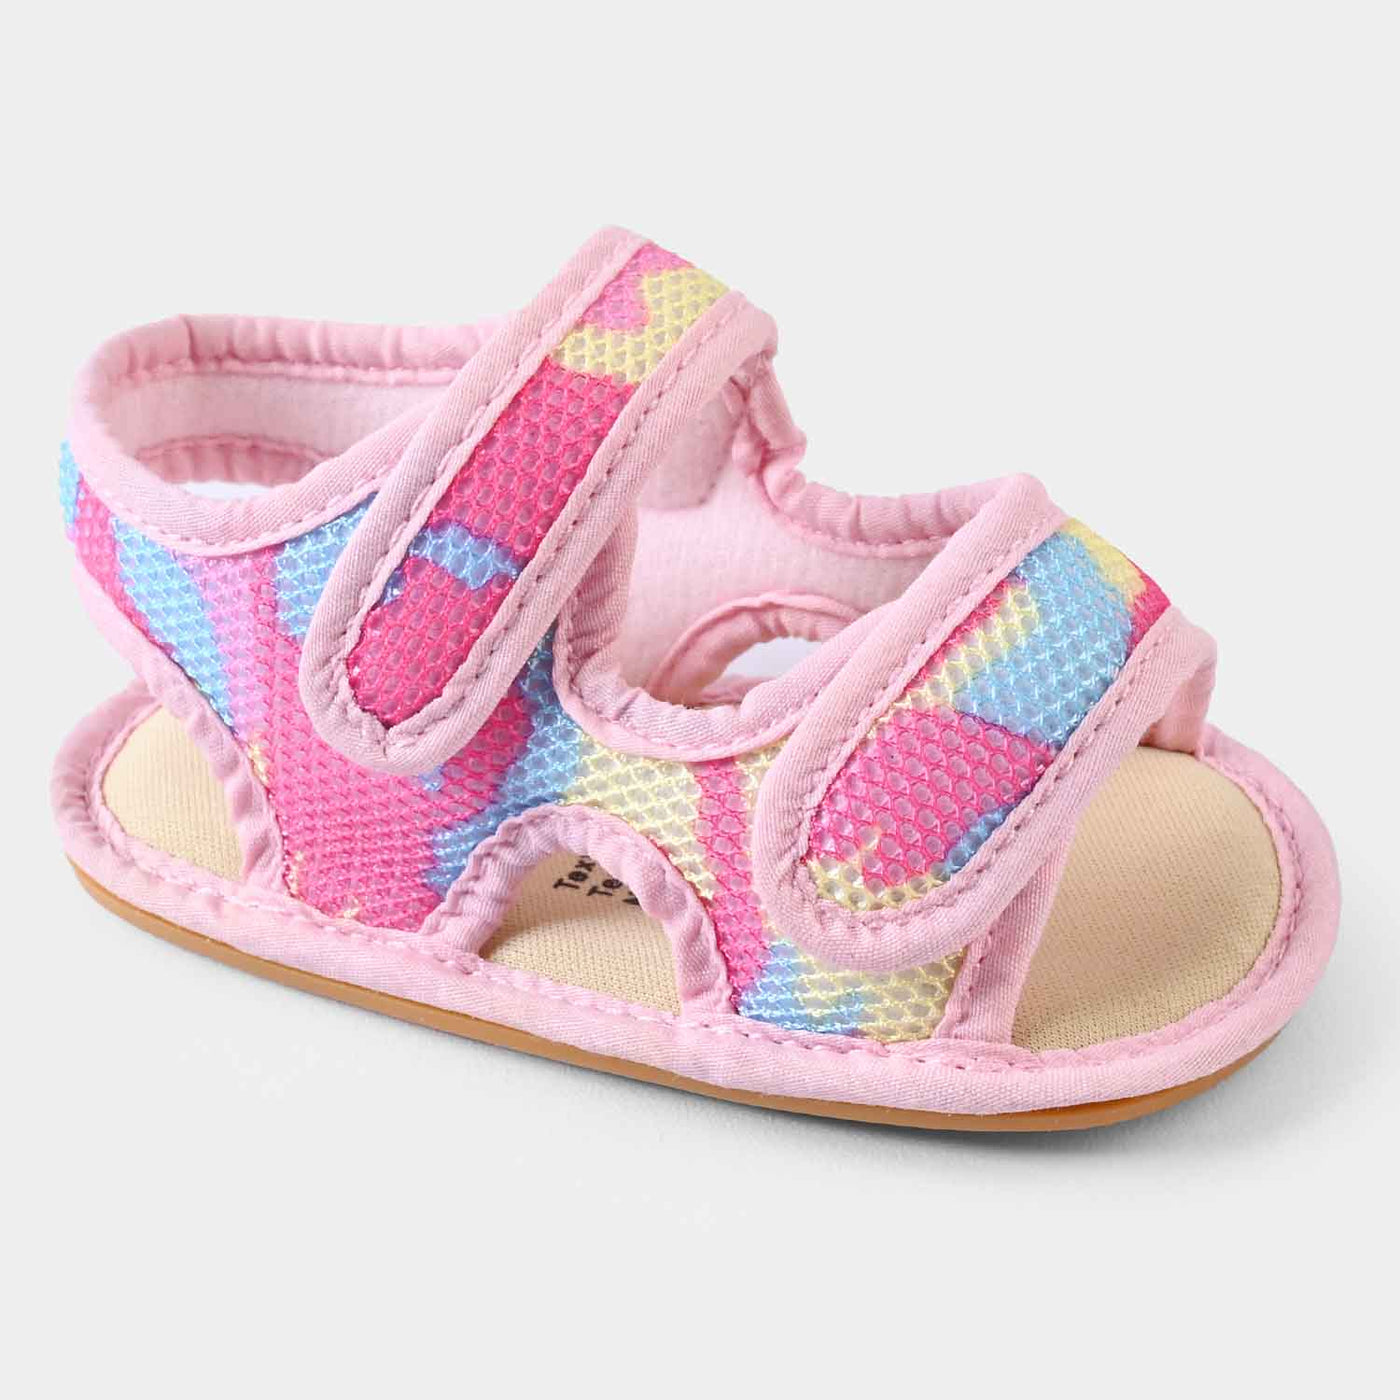 Baby Girl Shoes D17-Pink